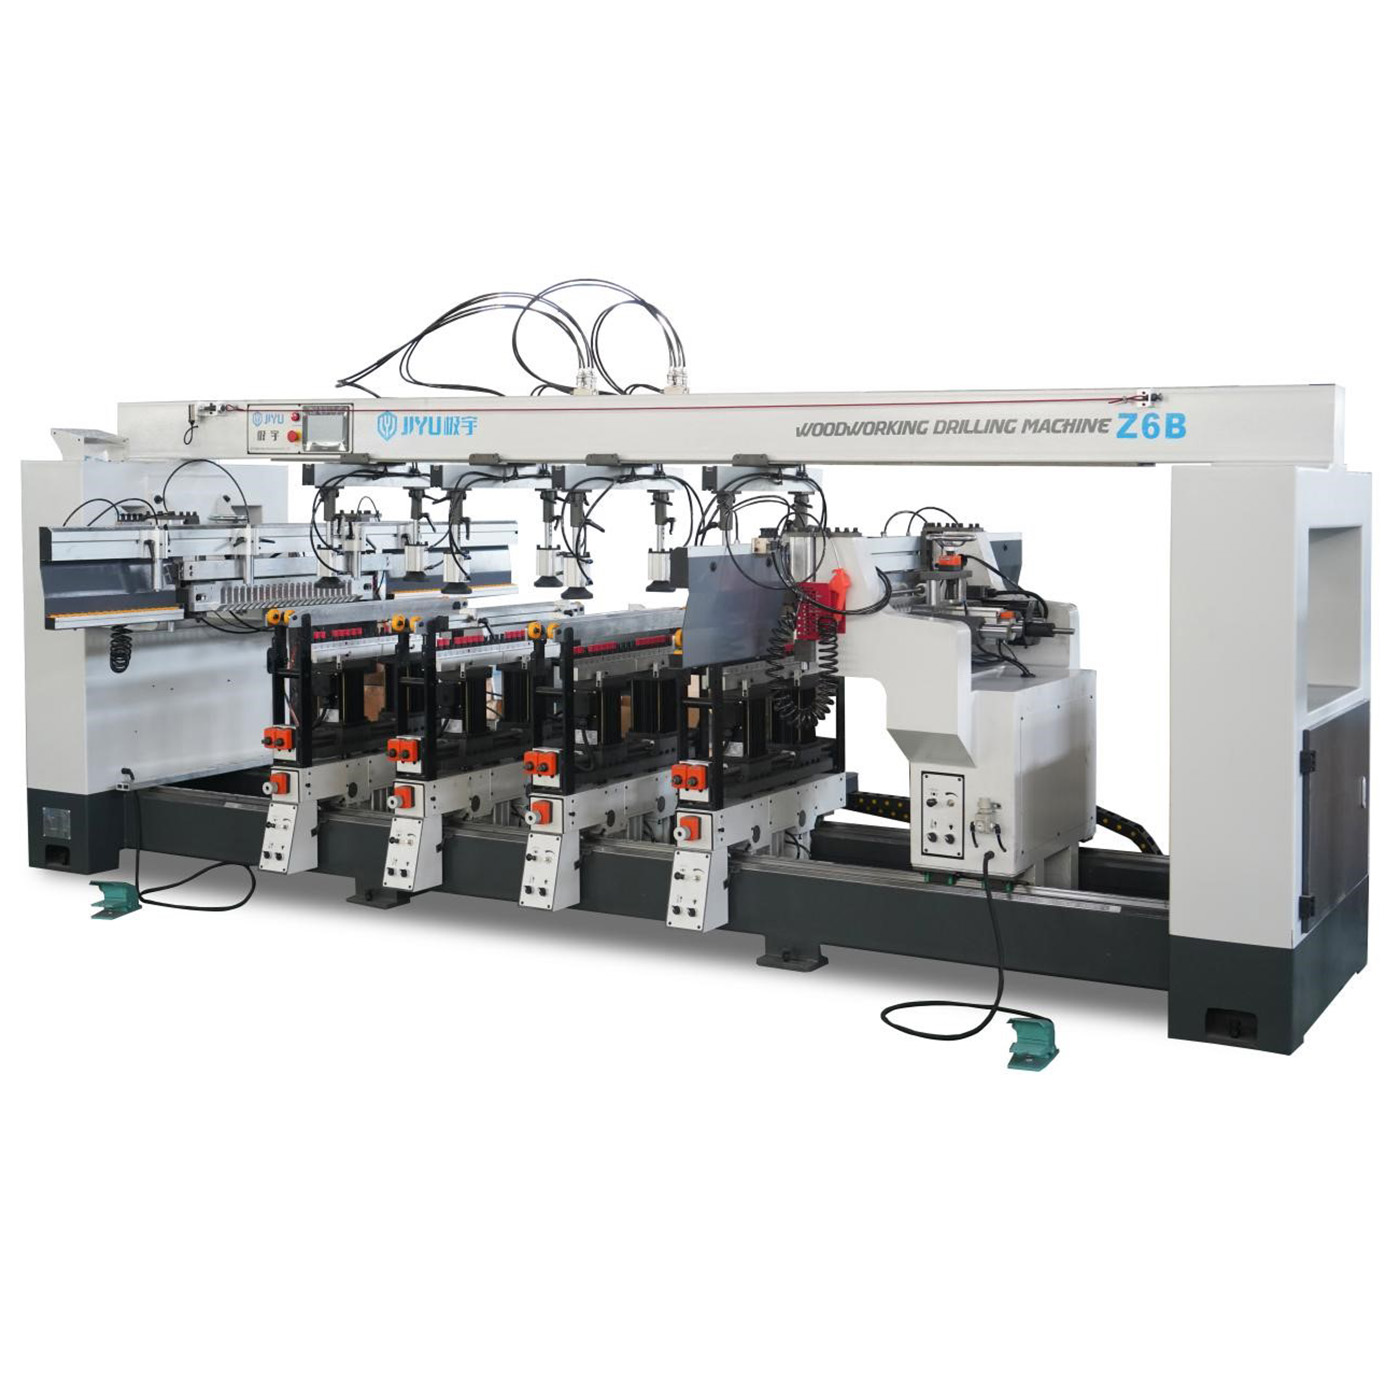 Z6B Six rows boring machine with double motor